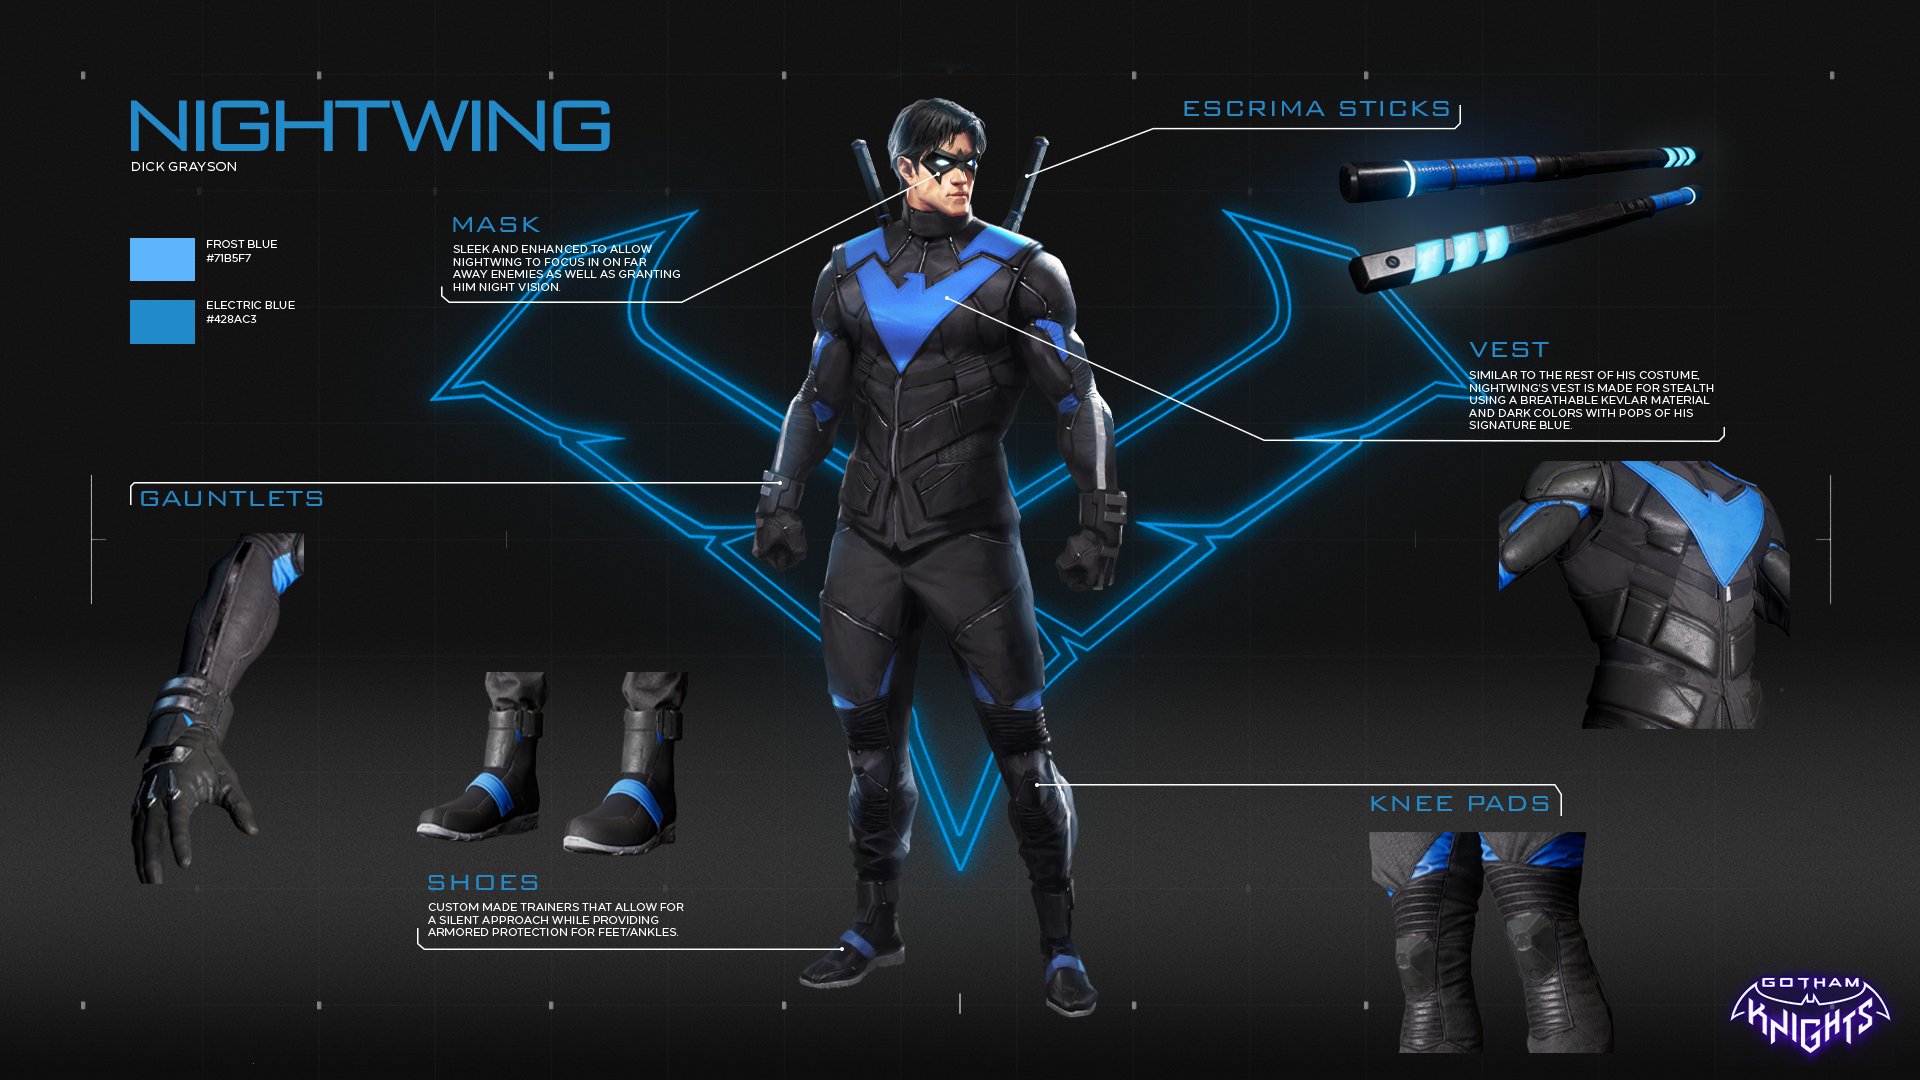 Gotham Knights Nightwing outfit breakdown